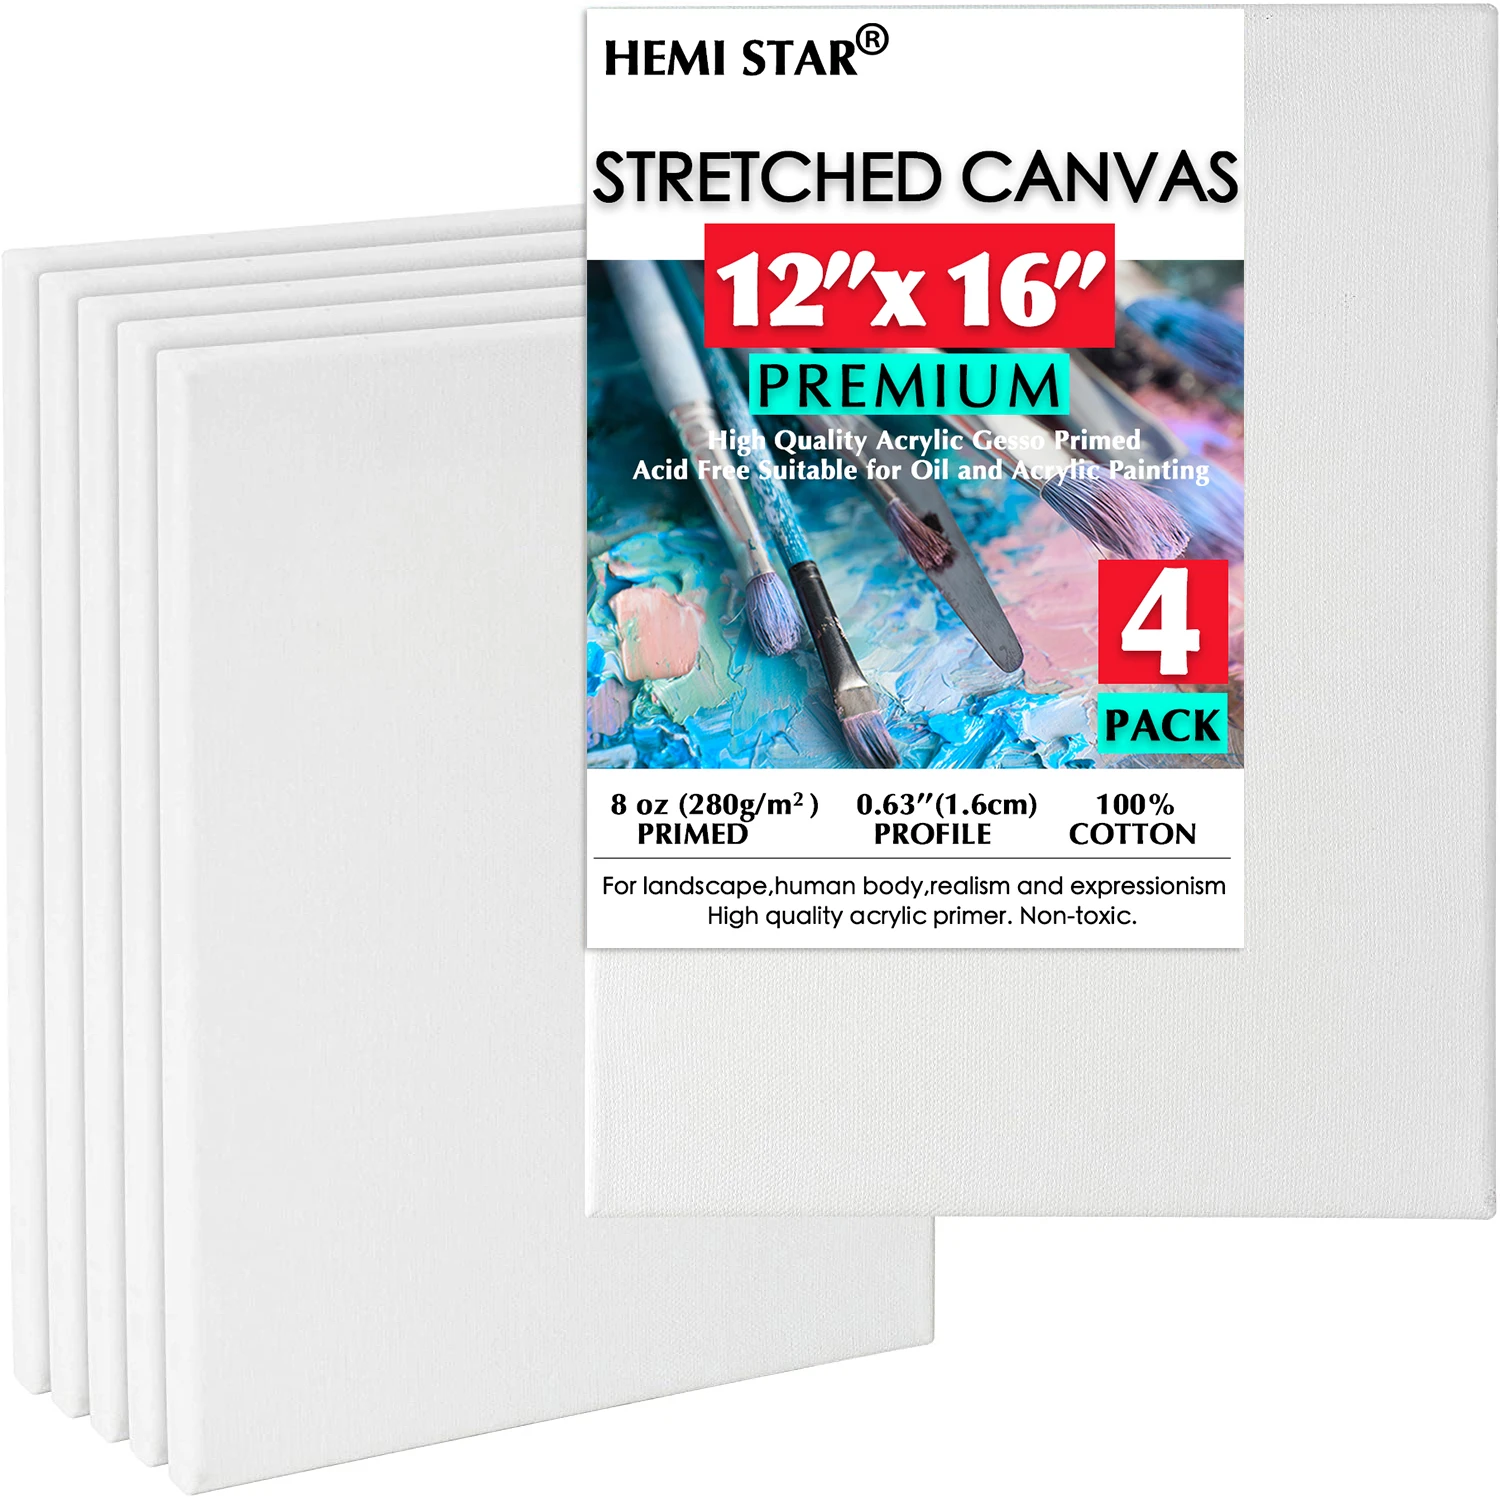 

Stretched Canvas 4pcs Stretched Blank Canvases Boards for Painting, Acrylic, Oil, 100% Cotton, Acid-Free for Long-Lasting Colors